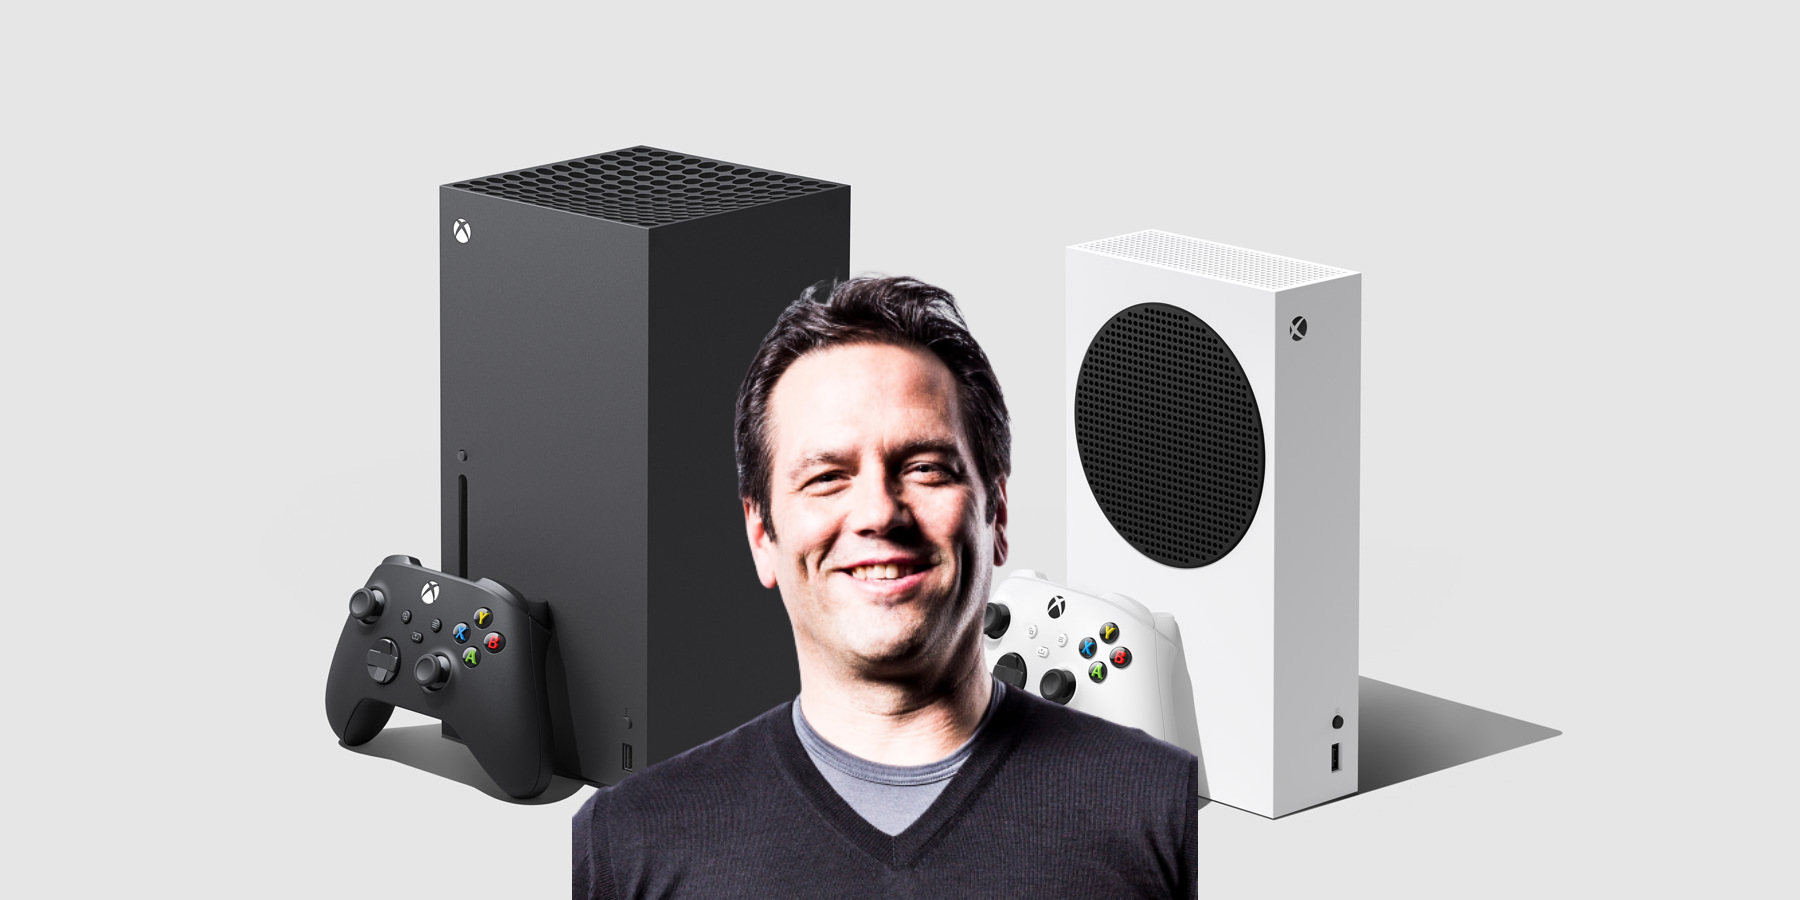 Disappointed by Redfall? So is Xbox head Phil Spencer